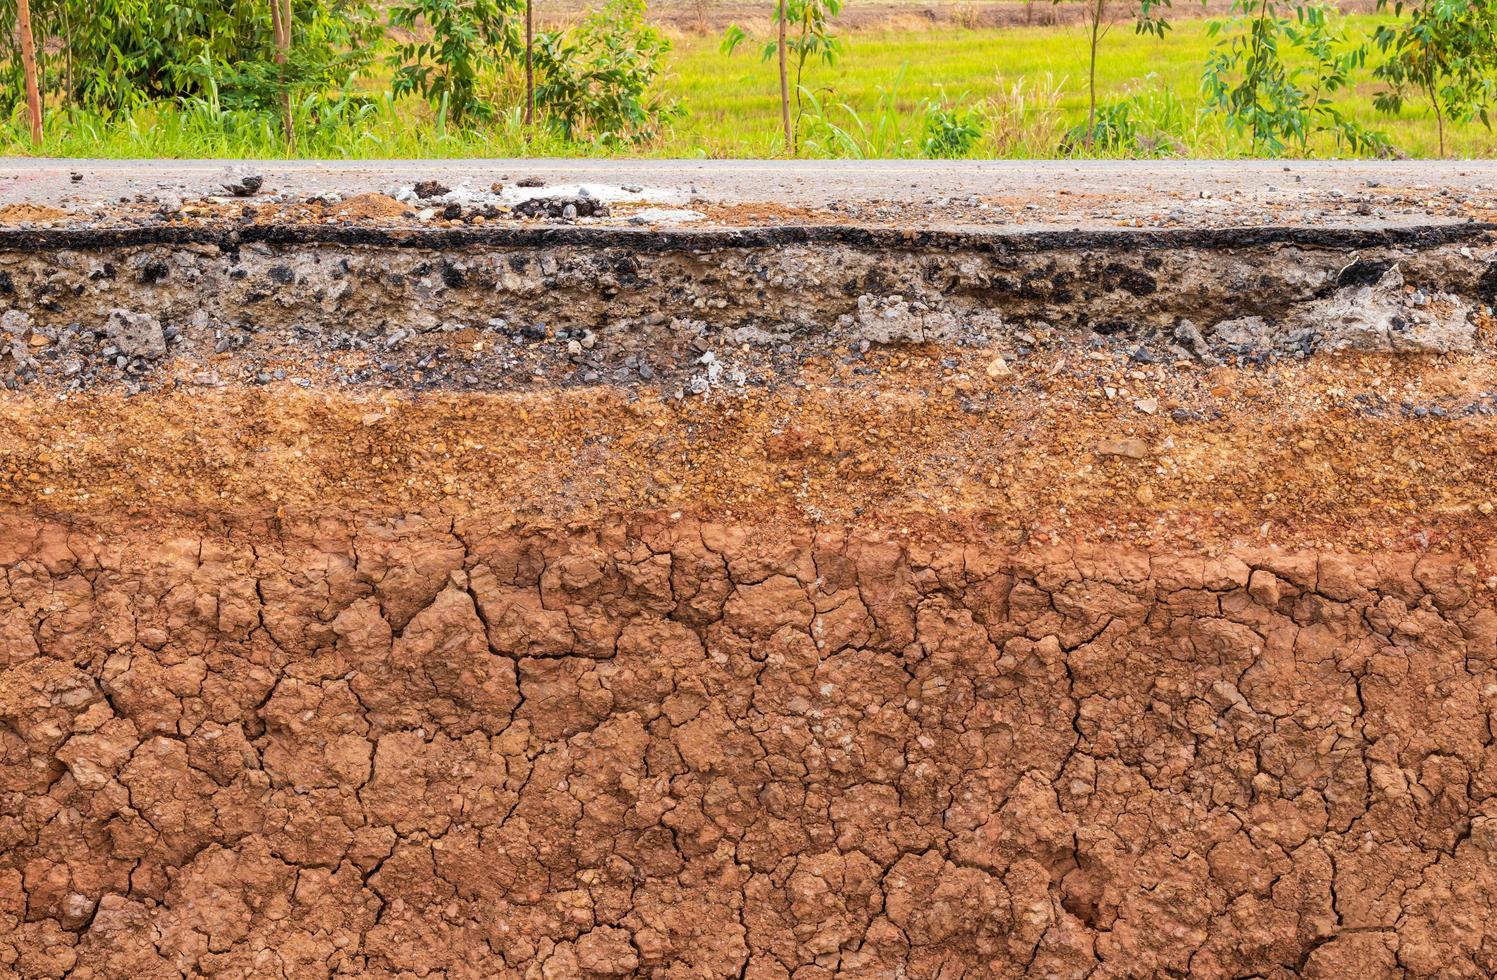 Soil under the road, which has been eroded in the countryside. photo